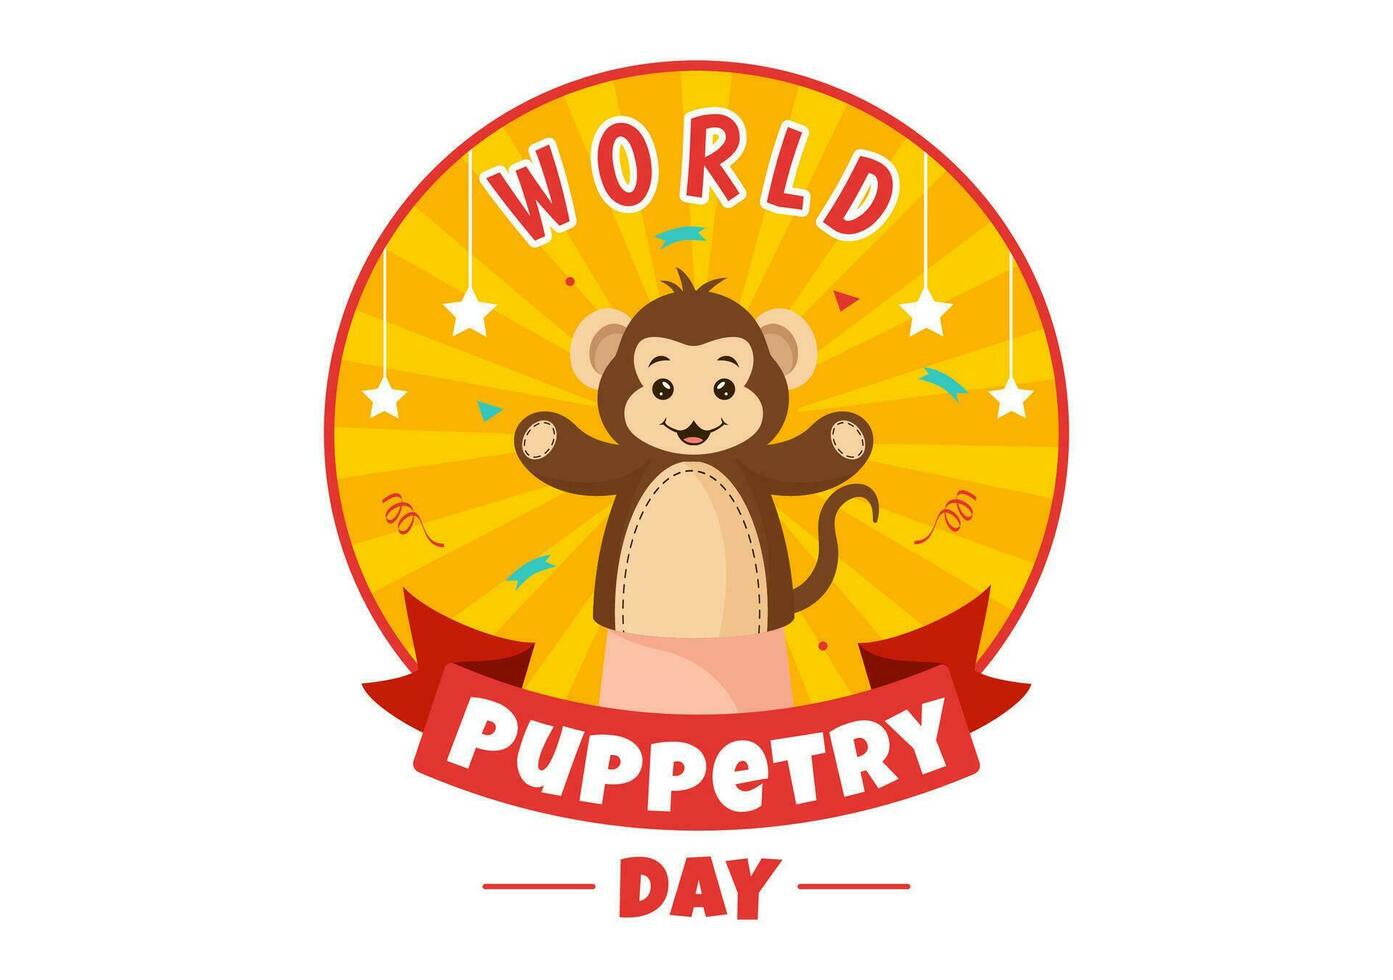 World Puppetry Day Vector Illustration on March 21 for Puppet Festivals which is moved by the Fingers Hands in Flat Cartoon Background Design